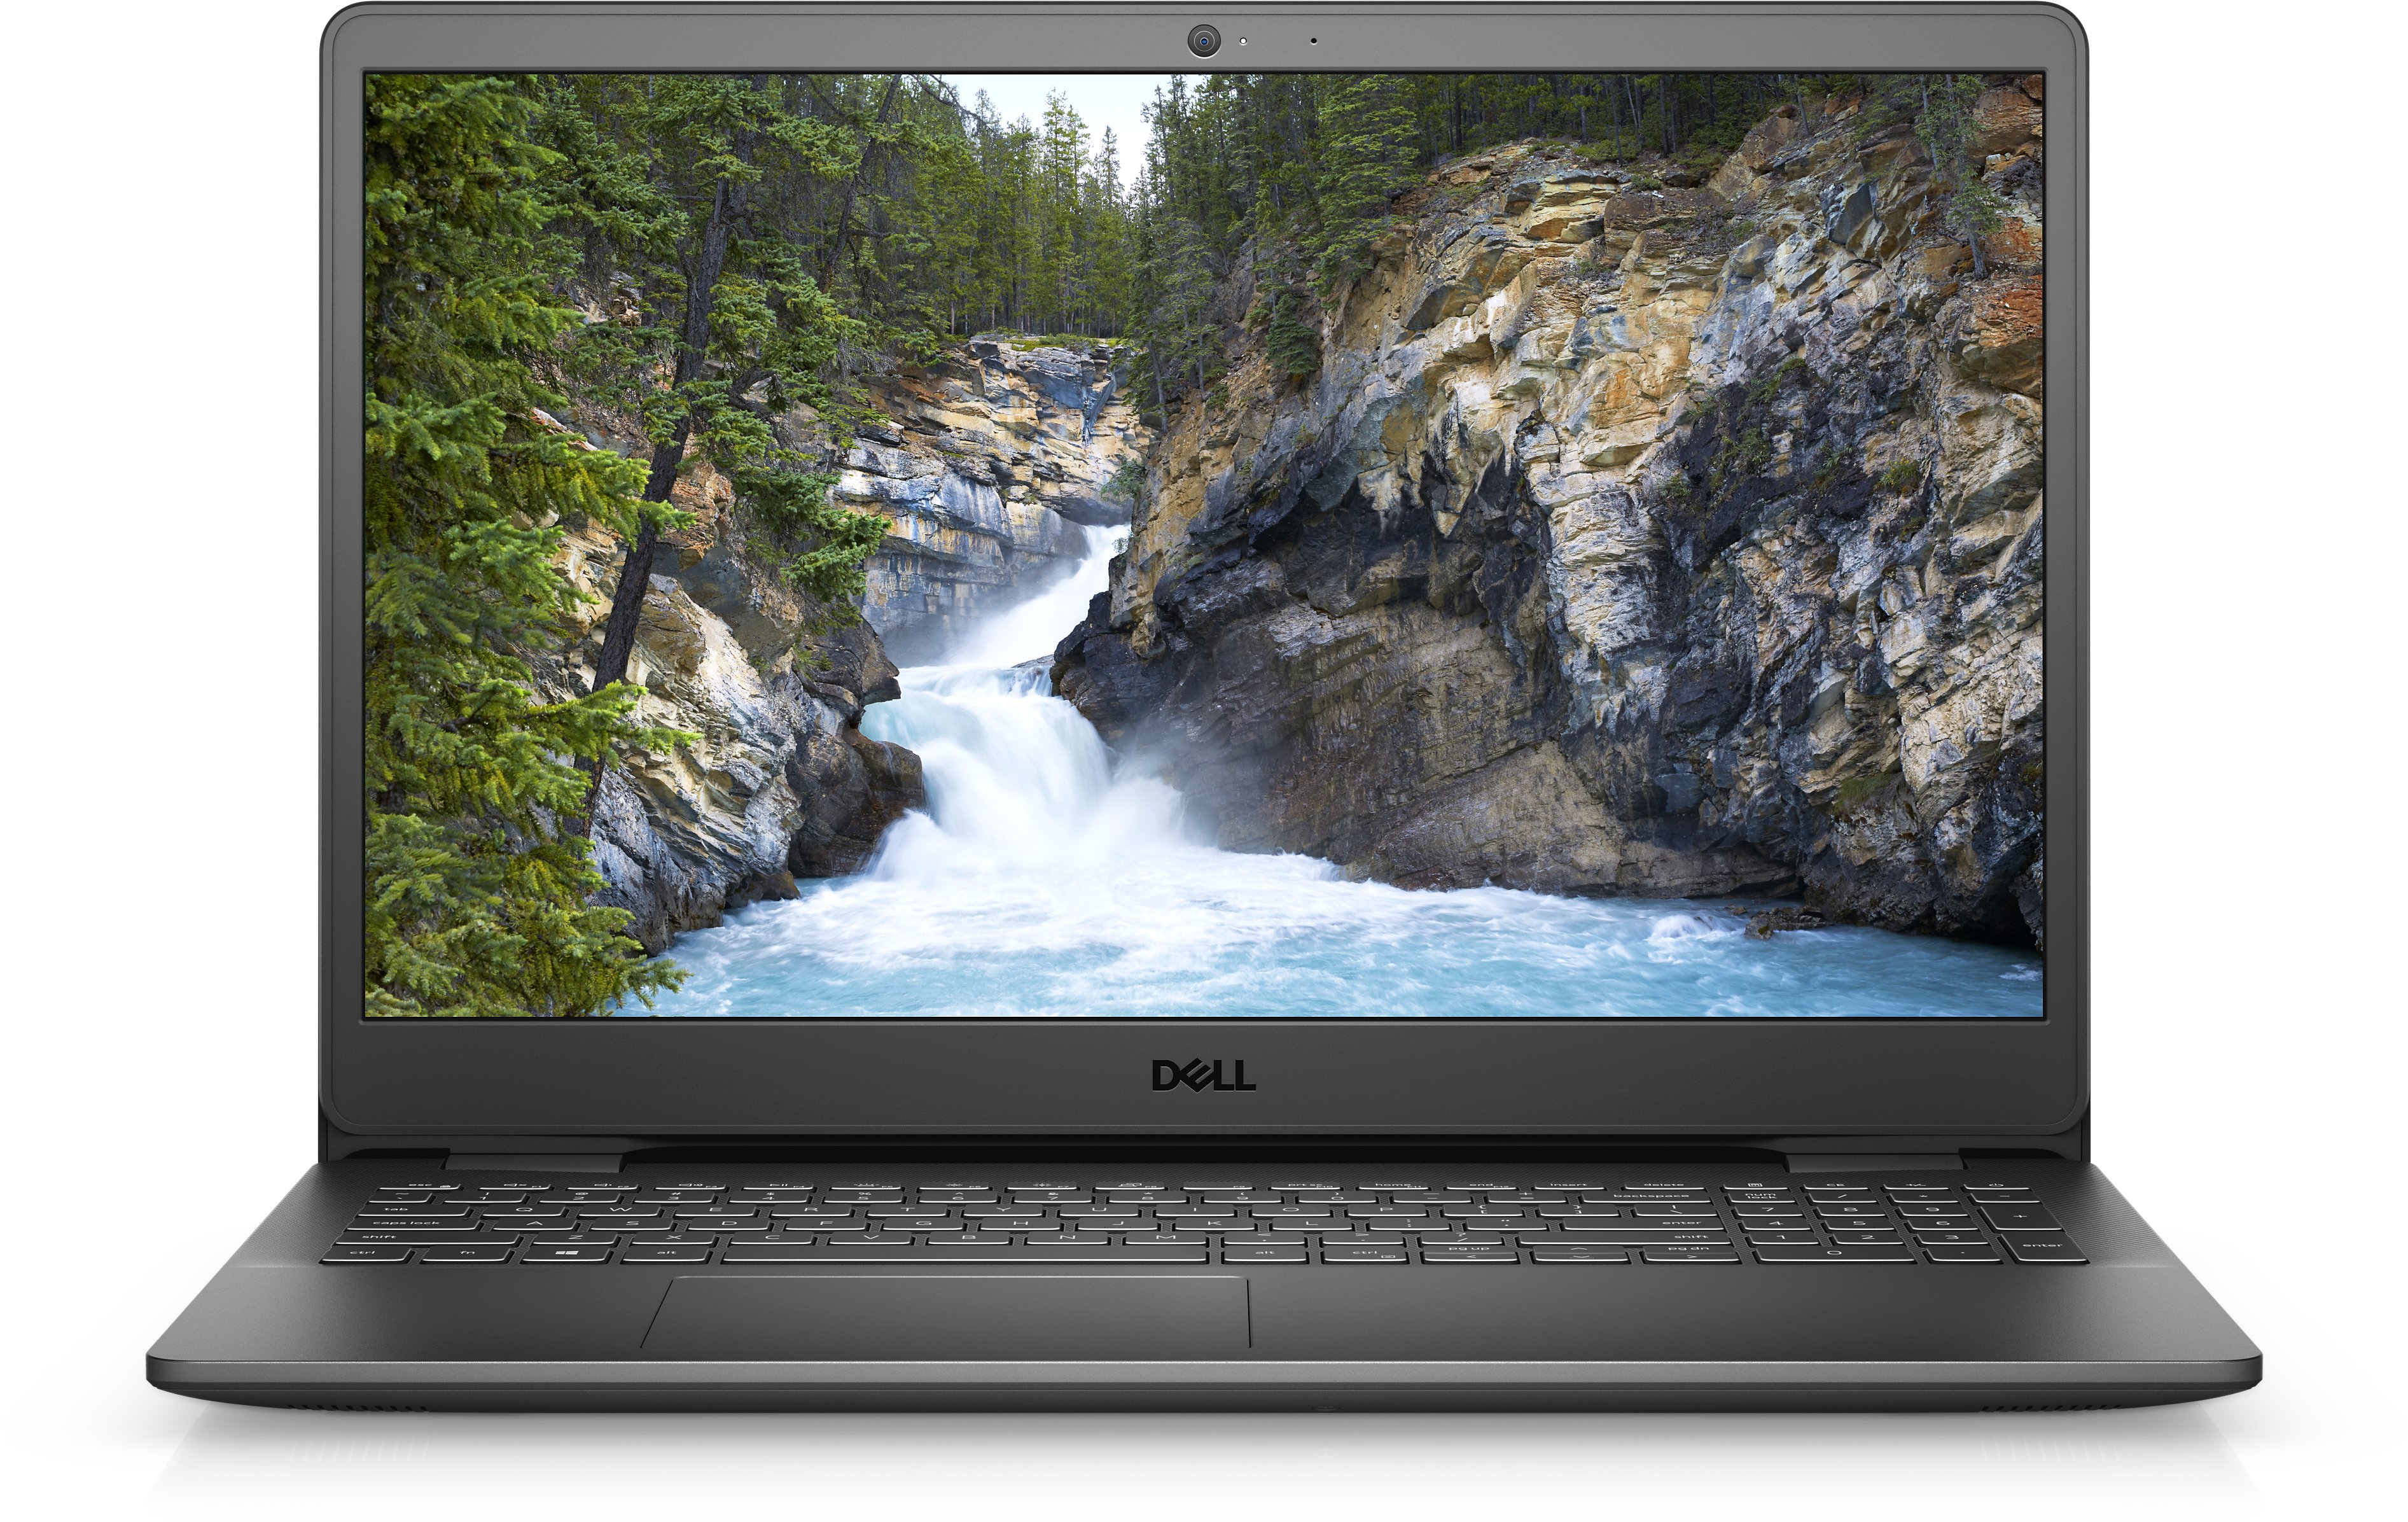 Shh, get 25% OFF selected Dell Vostro laptops and 45% OFF Dell Vostro Business desktops